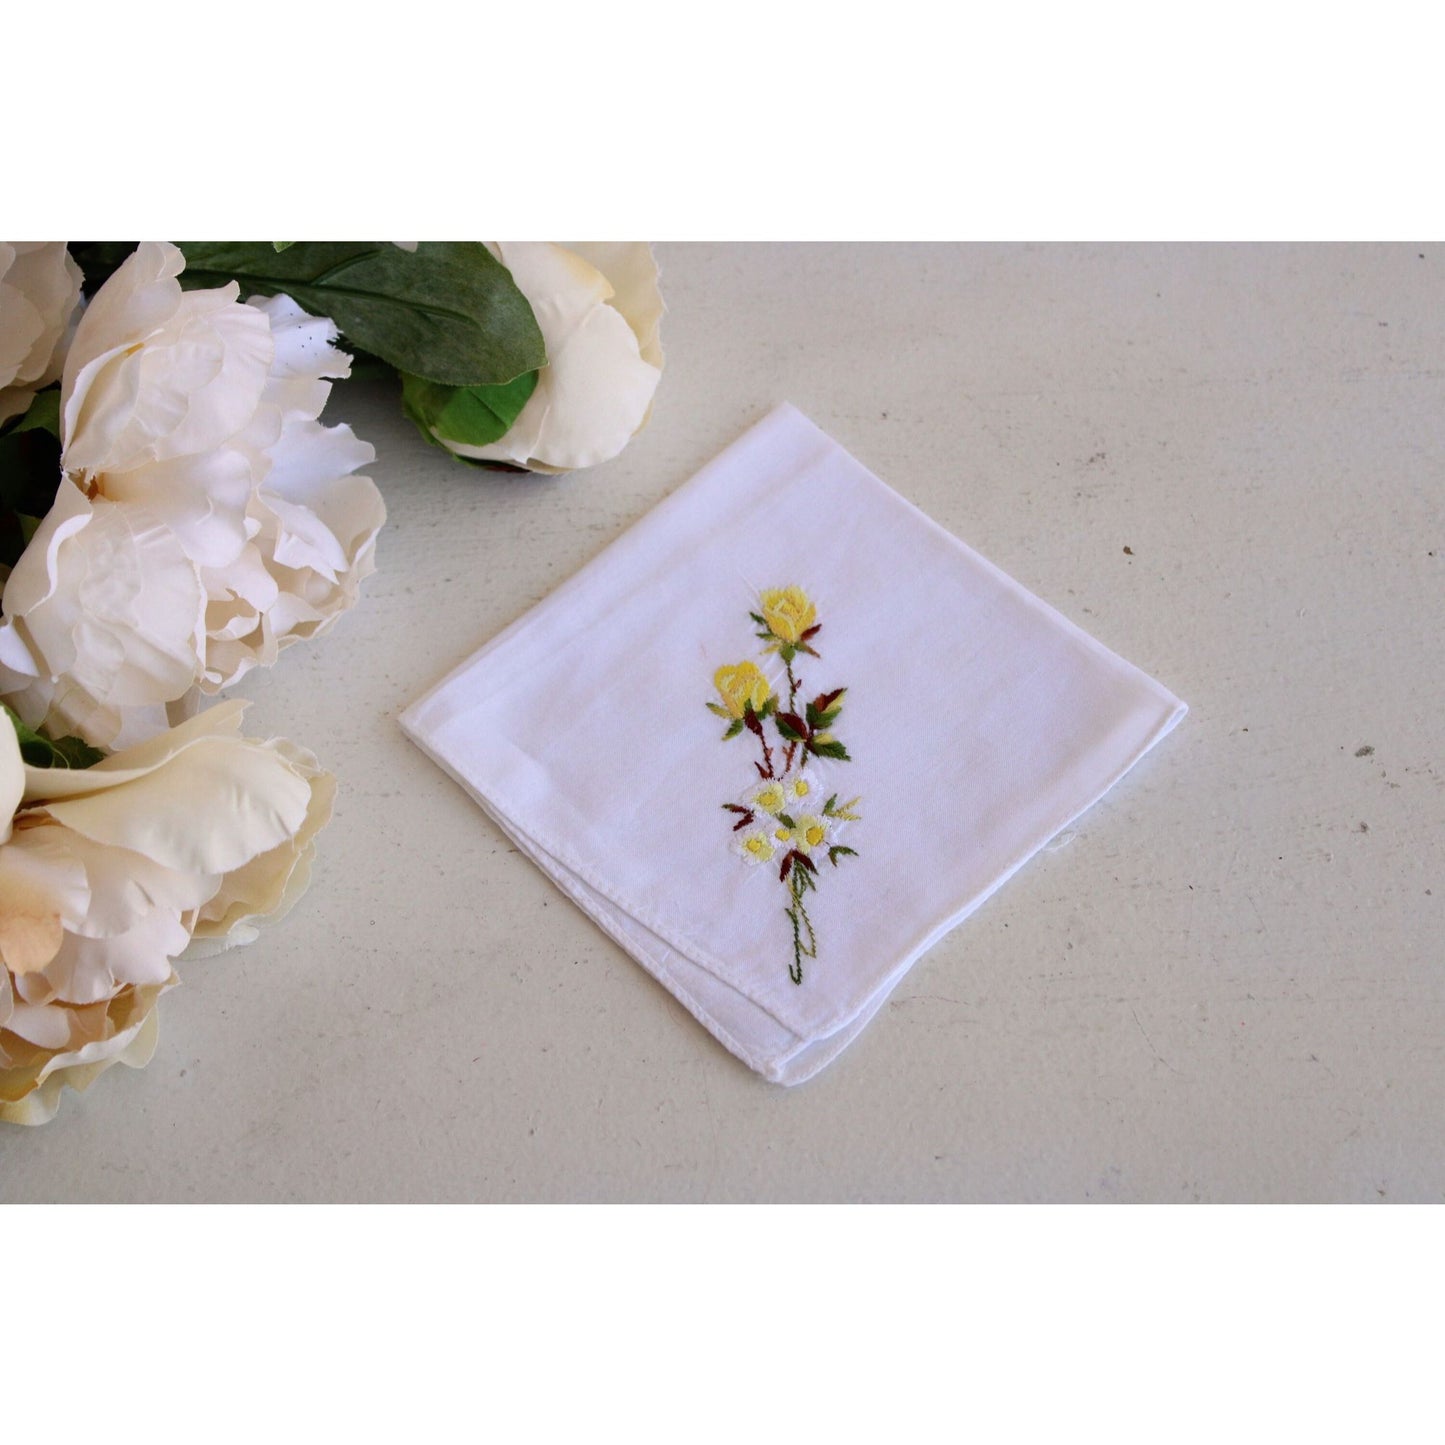 Vintage White Cotton Yellow Rose Embroidered Hanky